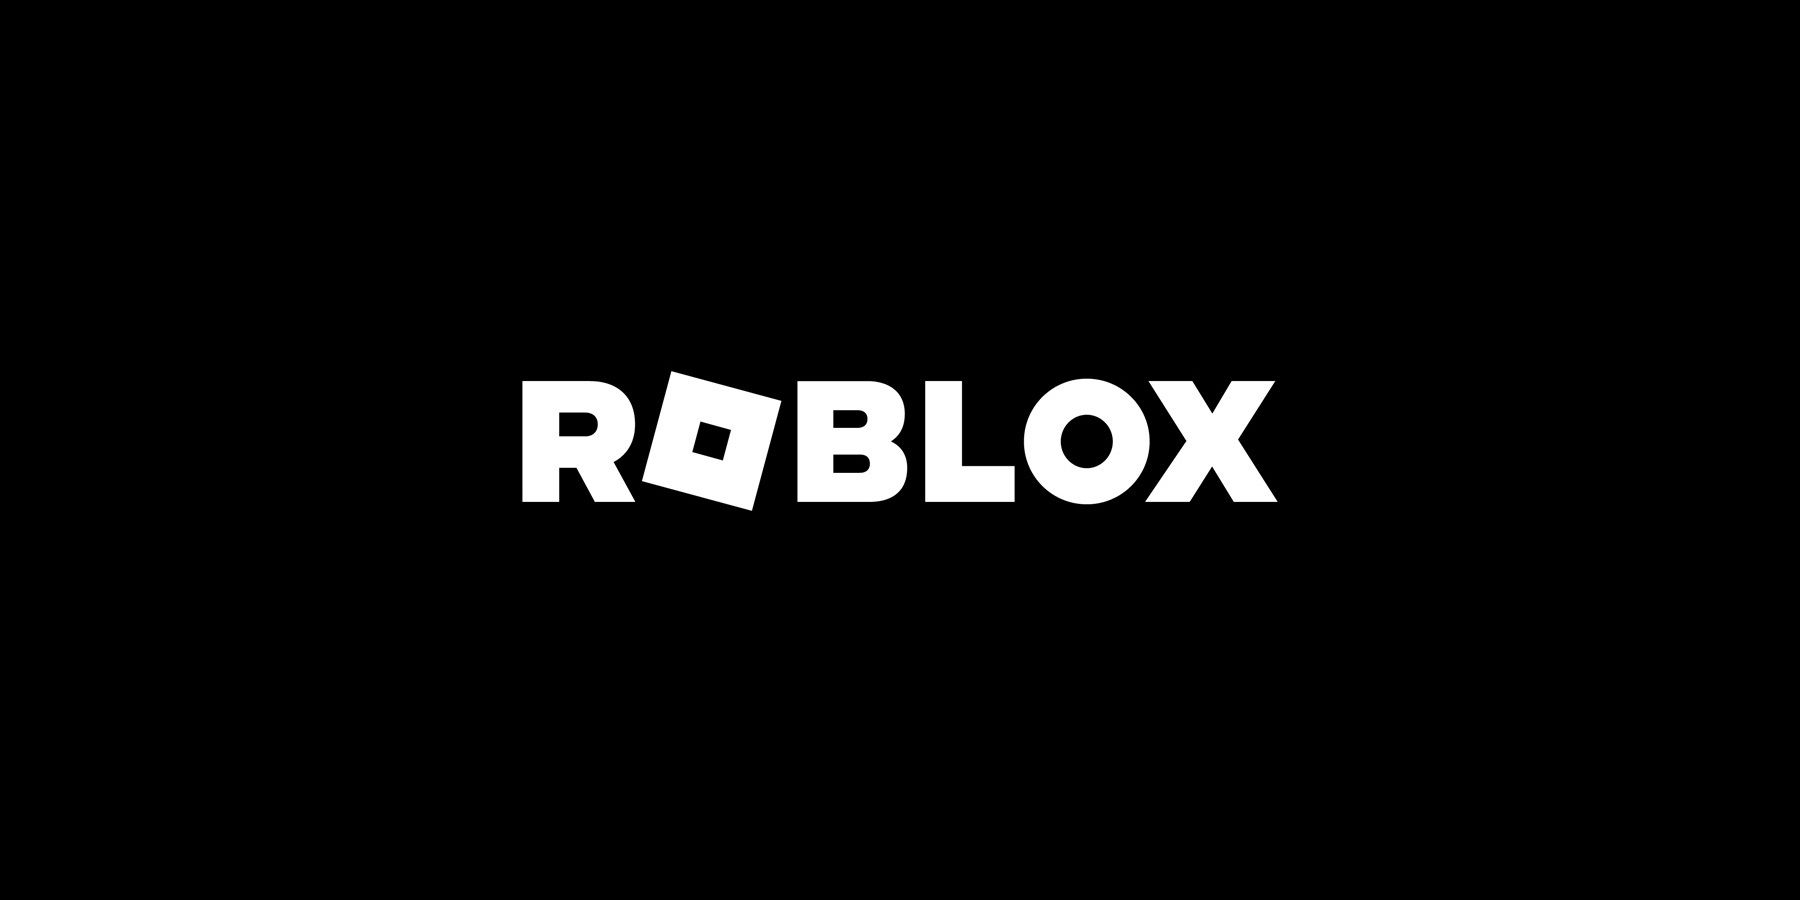 HighStakesDB - 📰 Roblox Faces Lawsuit Over Alleged Illegal